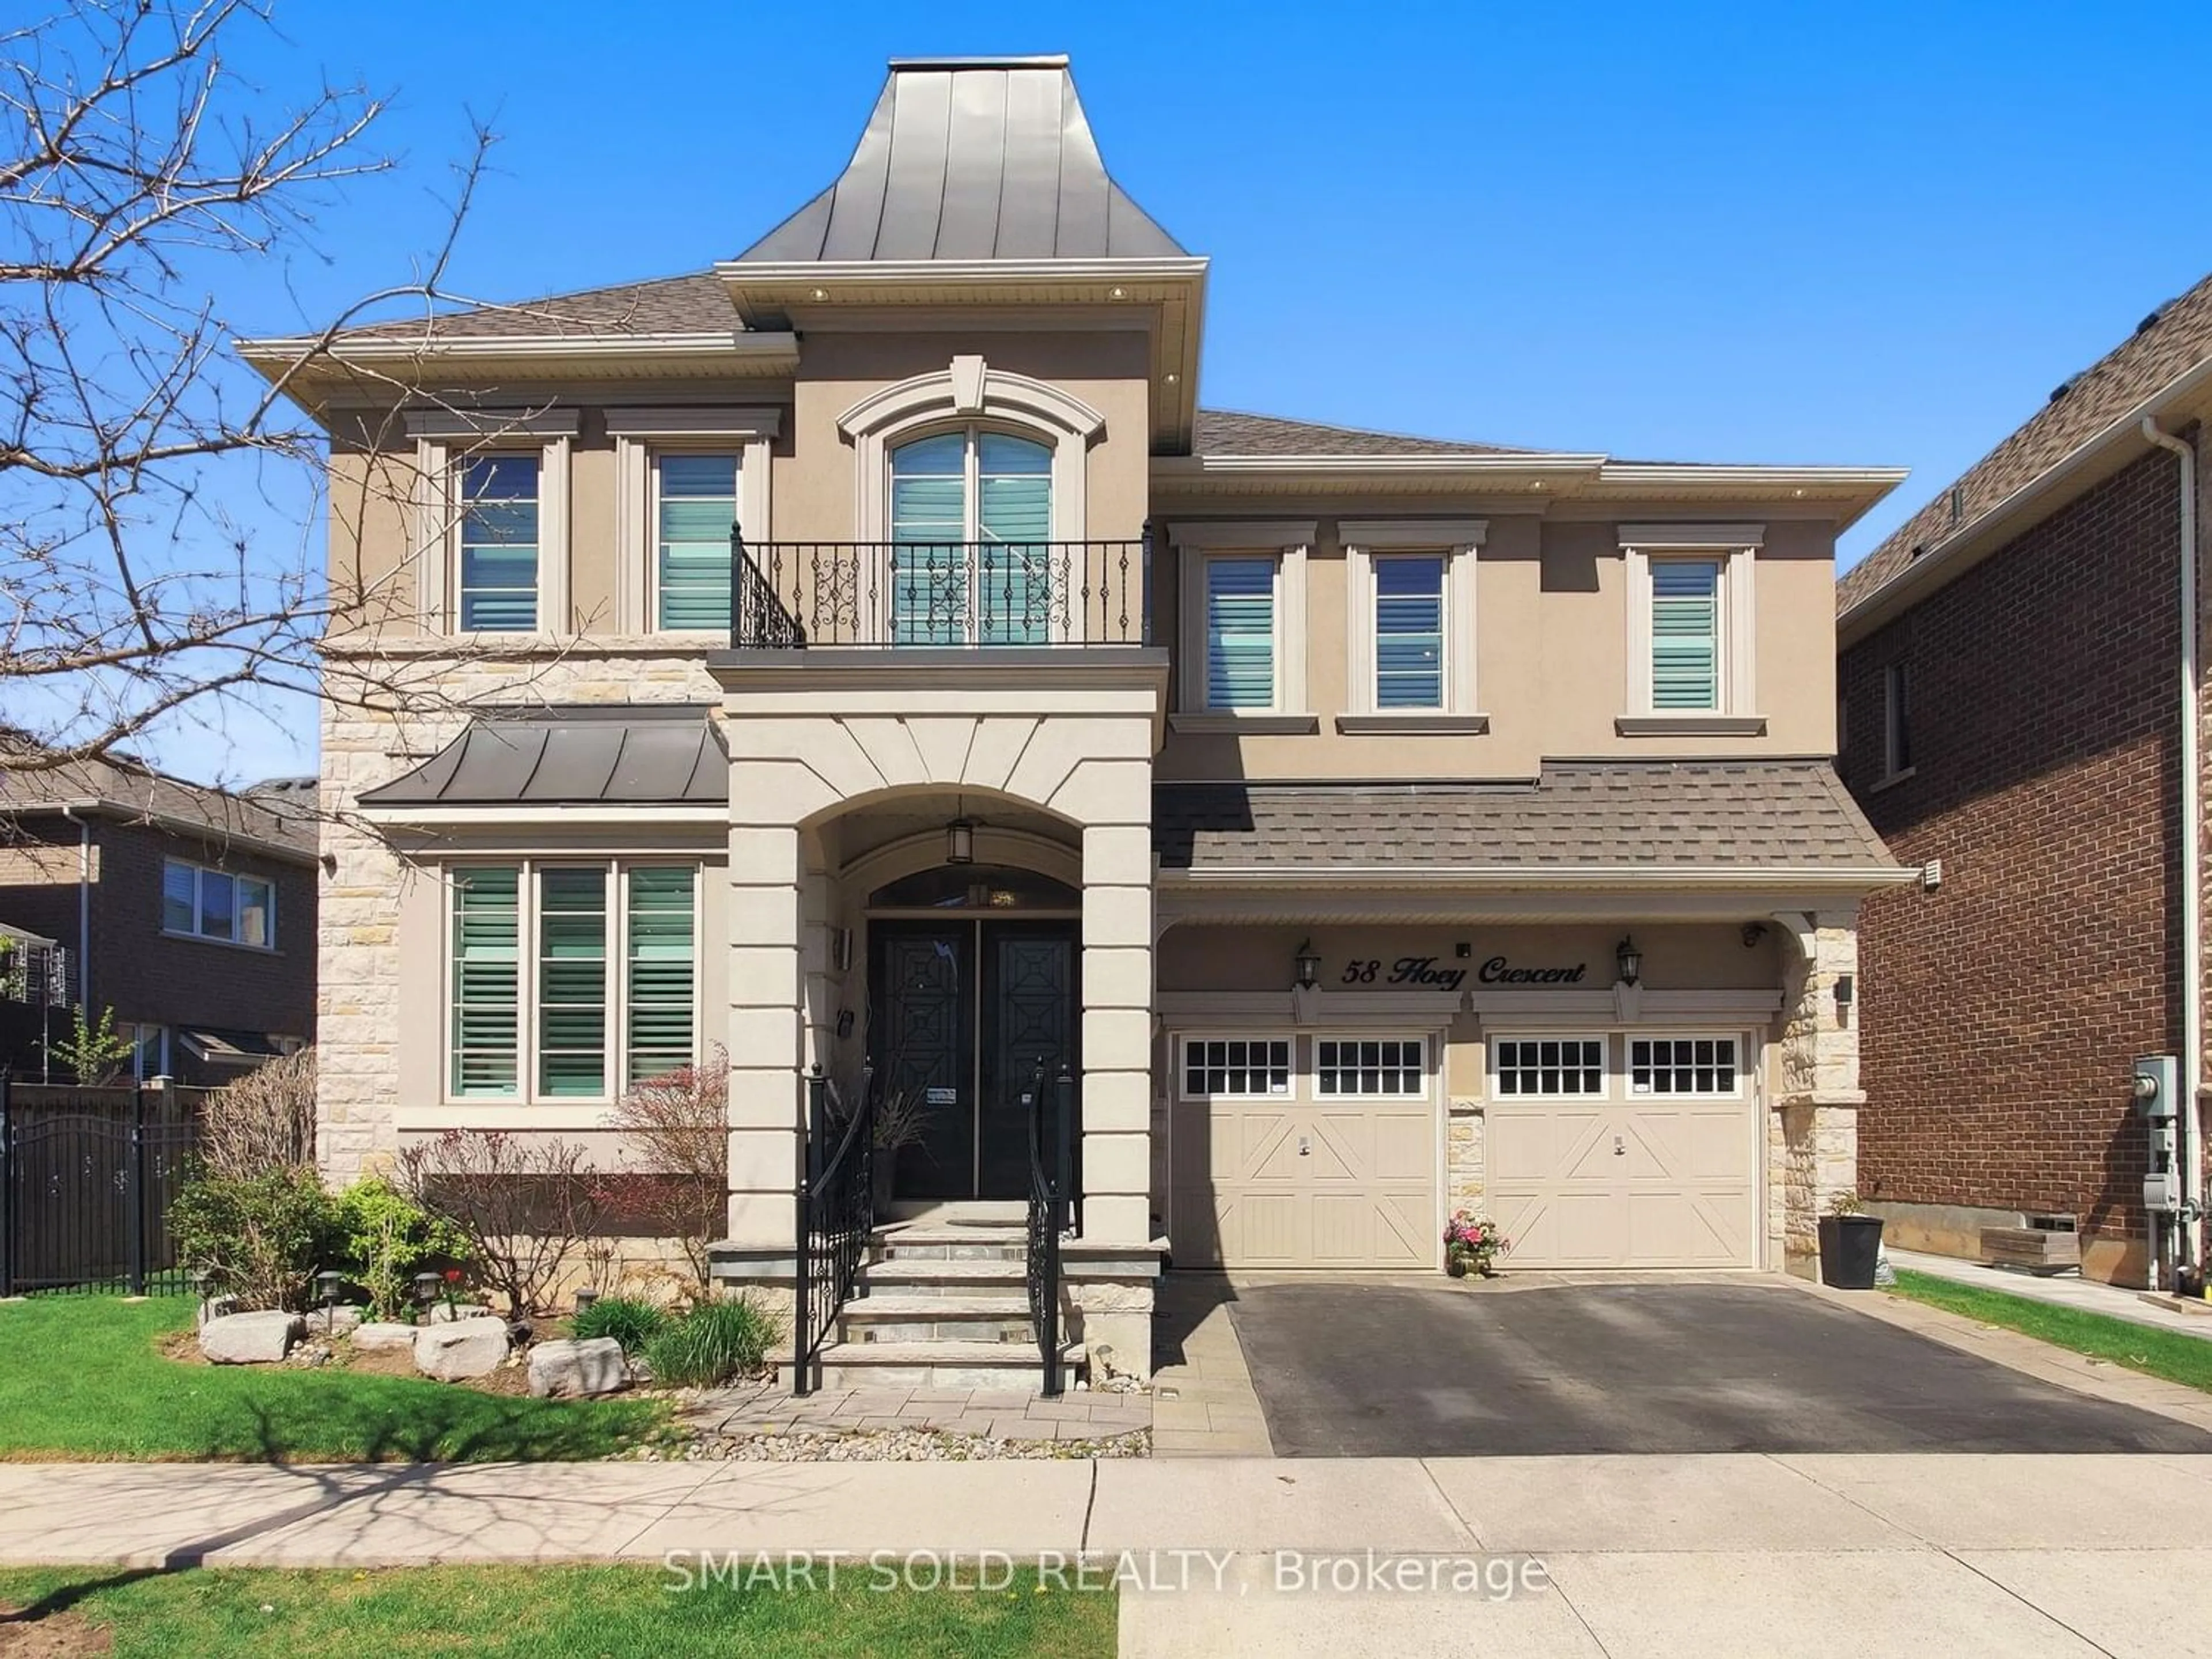 Home with brick exterior material for 58 Hoey Cres, Oakville Ontario L6M 0W4